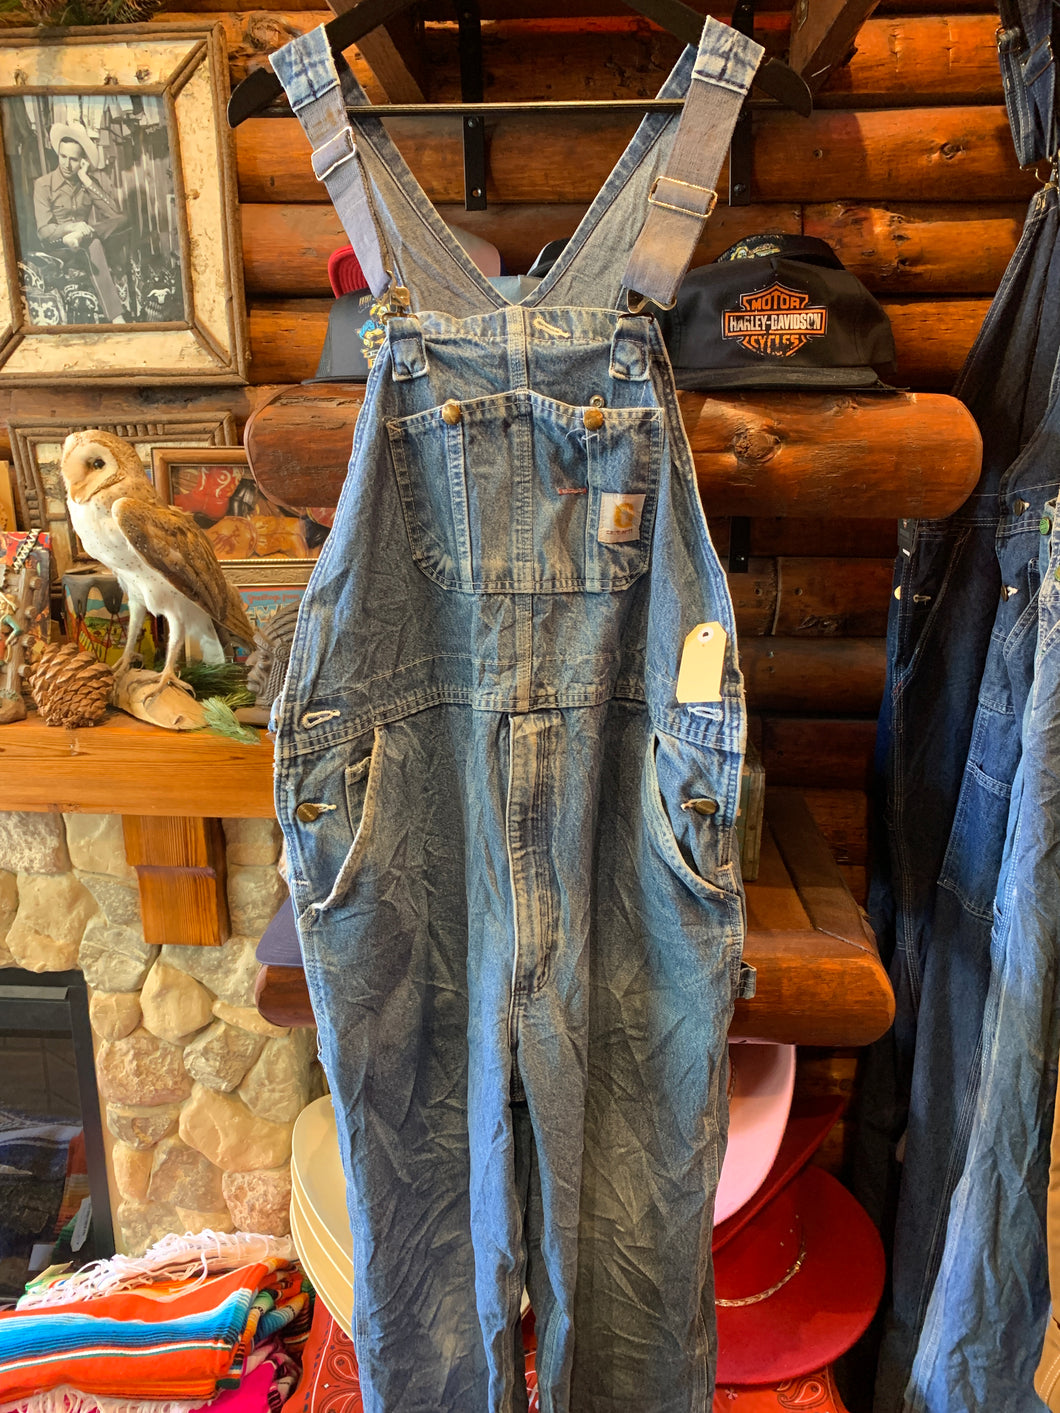 Vintage Carhartt Faded Overalls W38